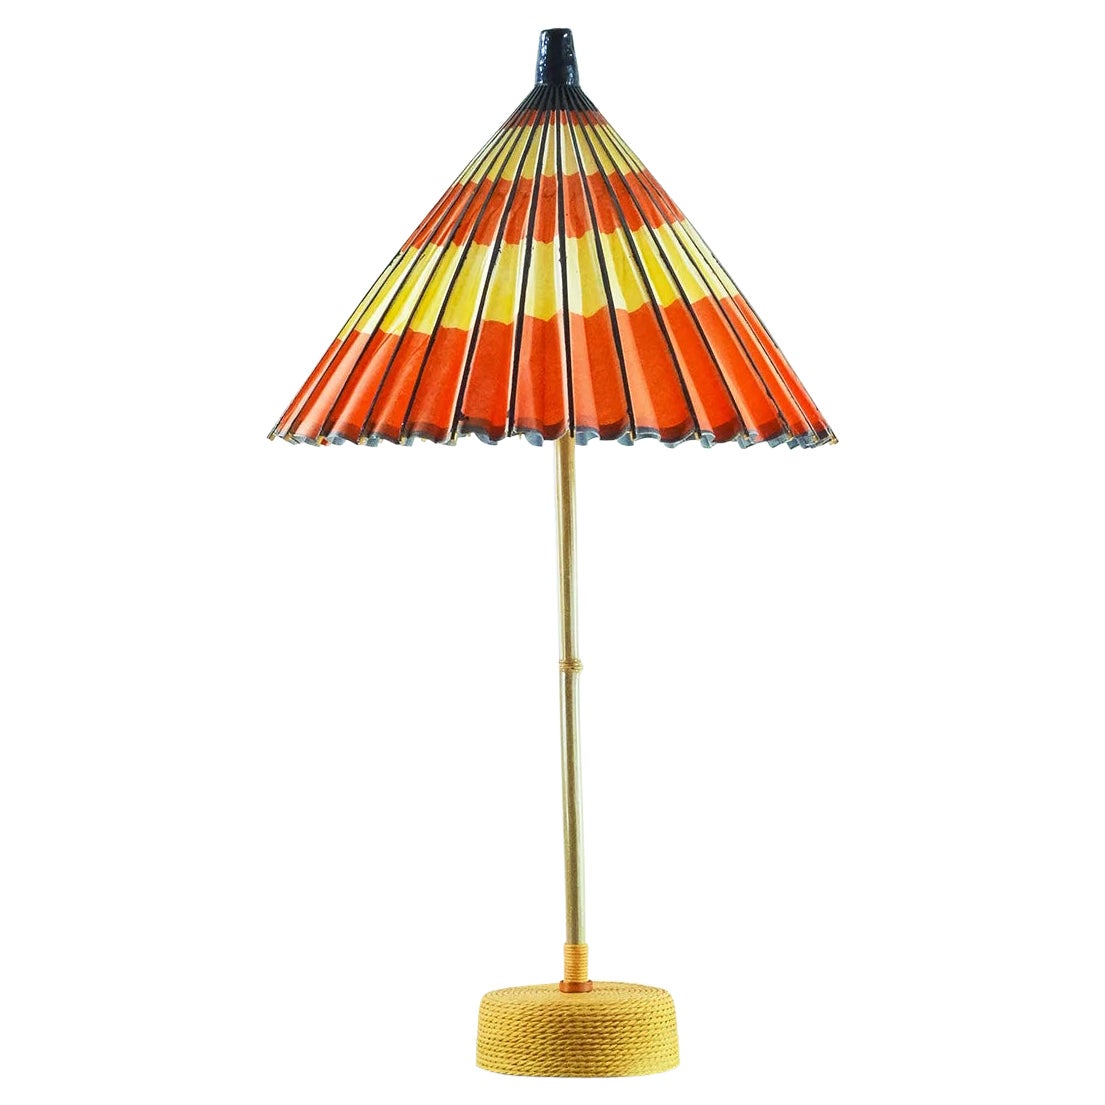 'World's Fair' Bamboo Lamp with Upcycled Parasol Shade by Christopher Tennant